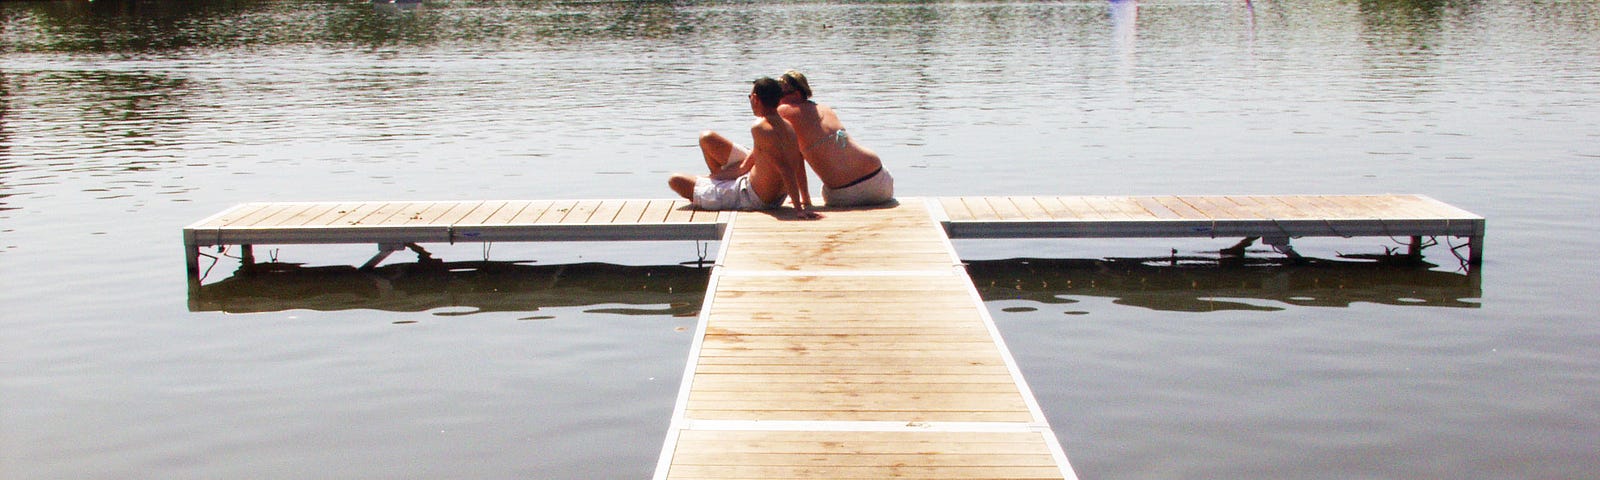 Couple sitting on a pier at the edge of a lake.